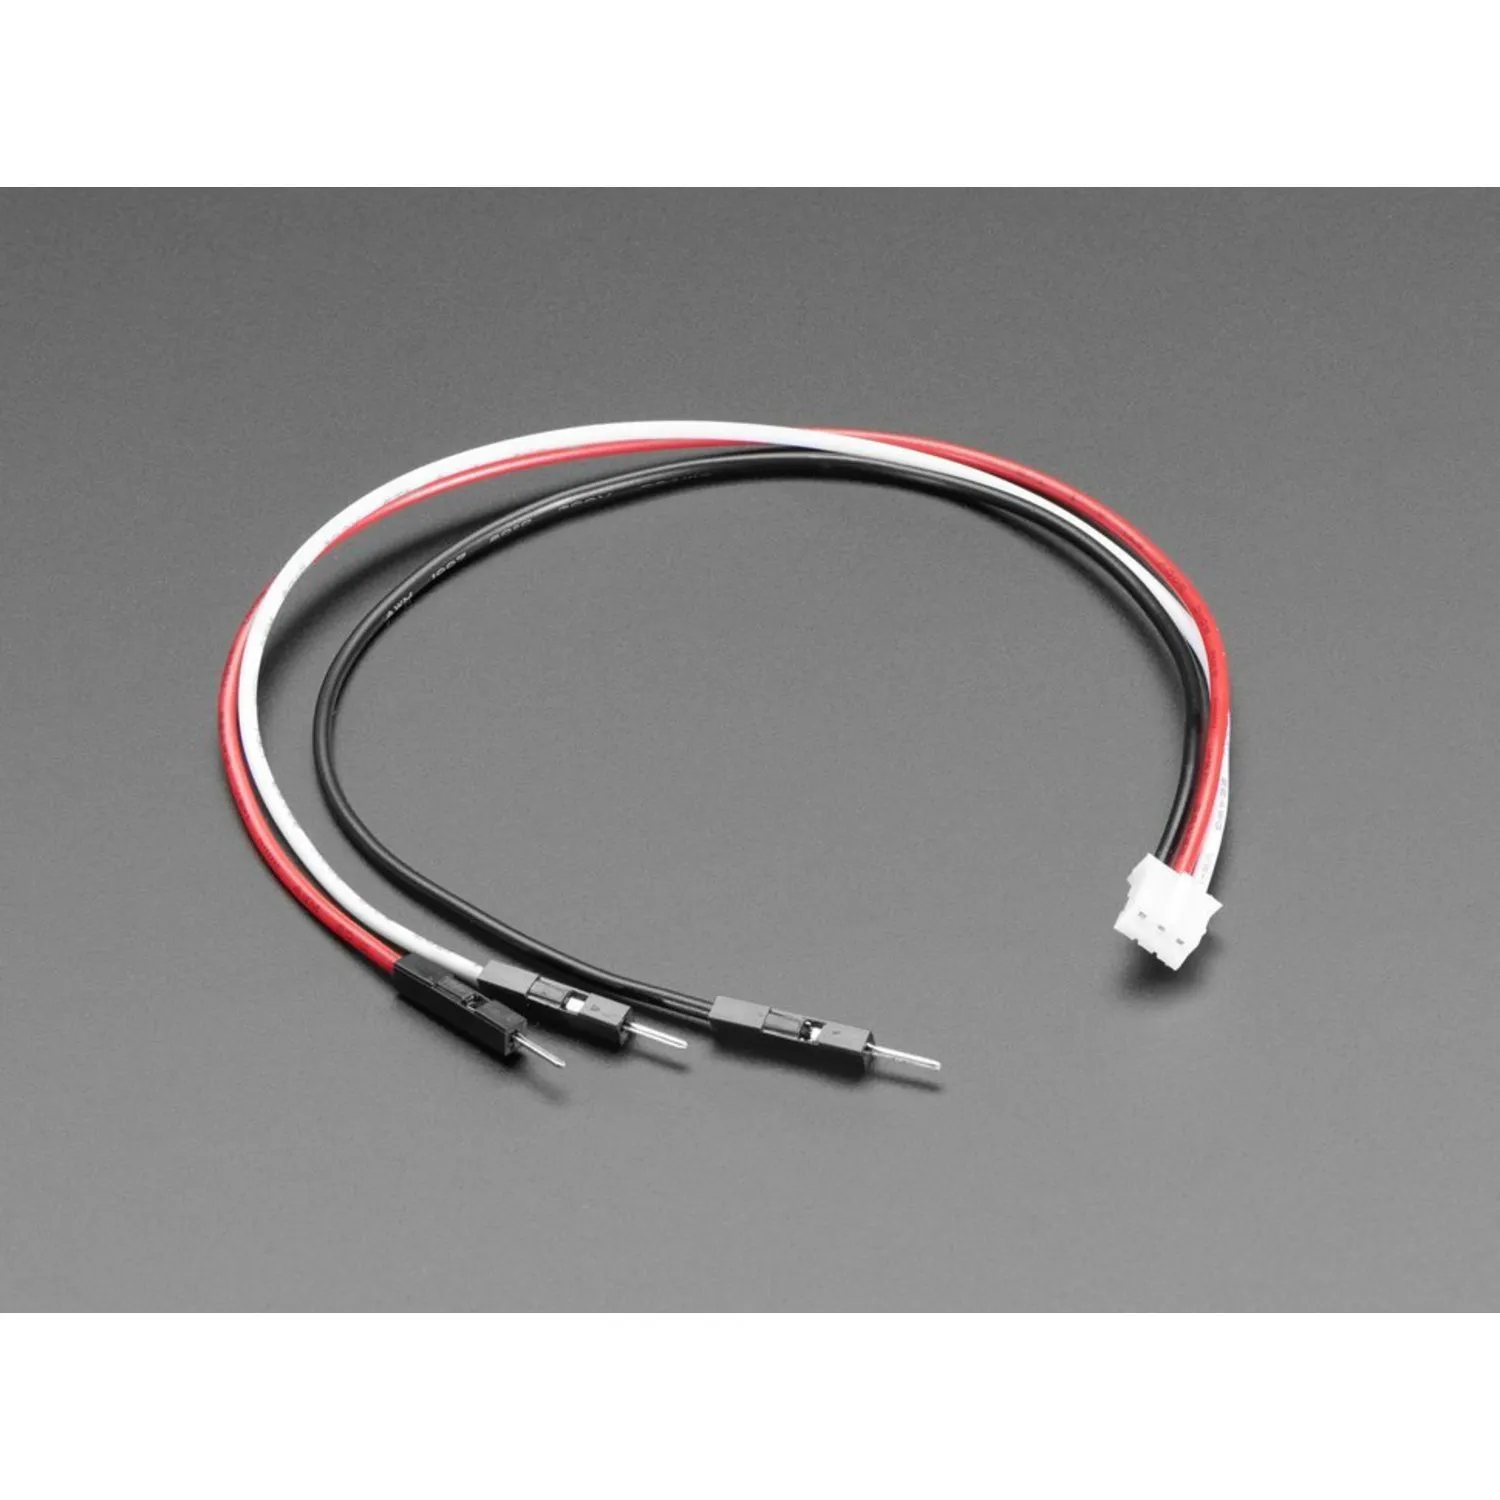 Photo of JST PH 3-Pin to Male Header Cable - 200mm